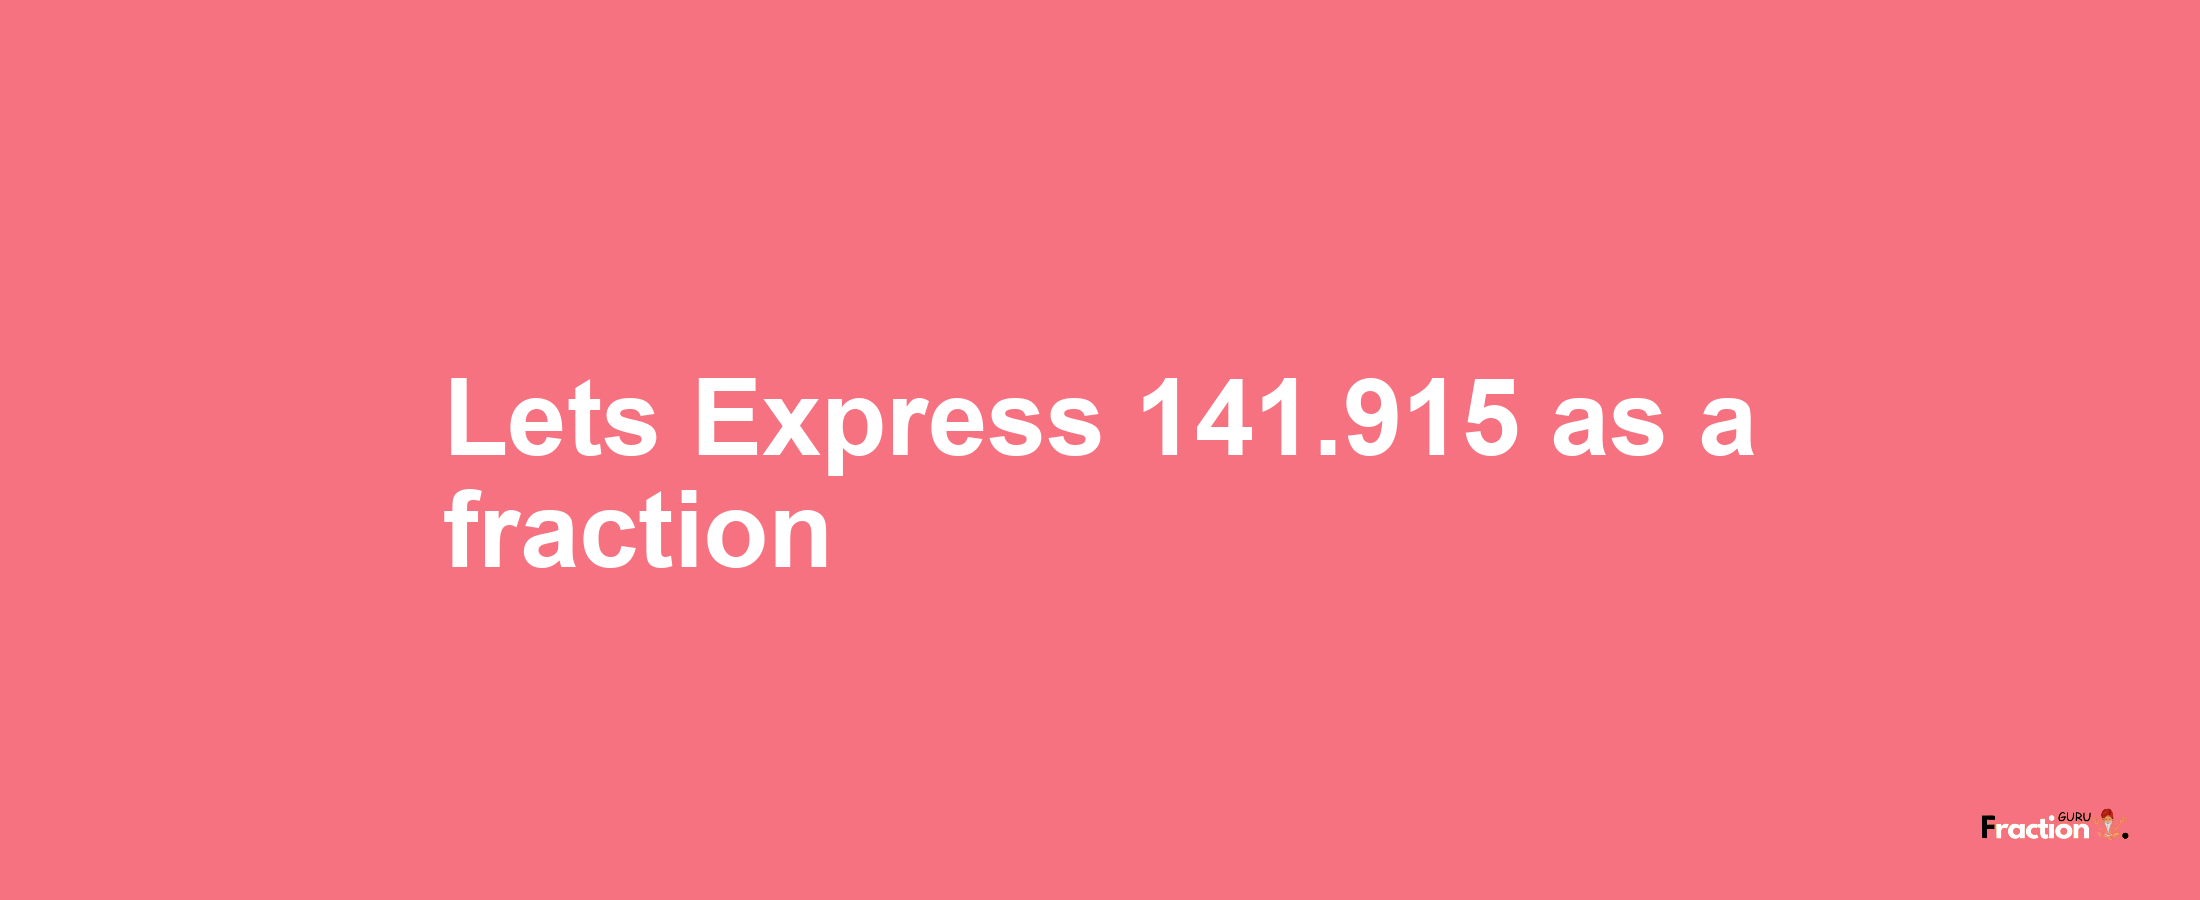 Lets Express 141.915 as afraction